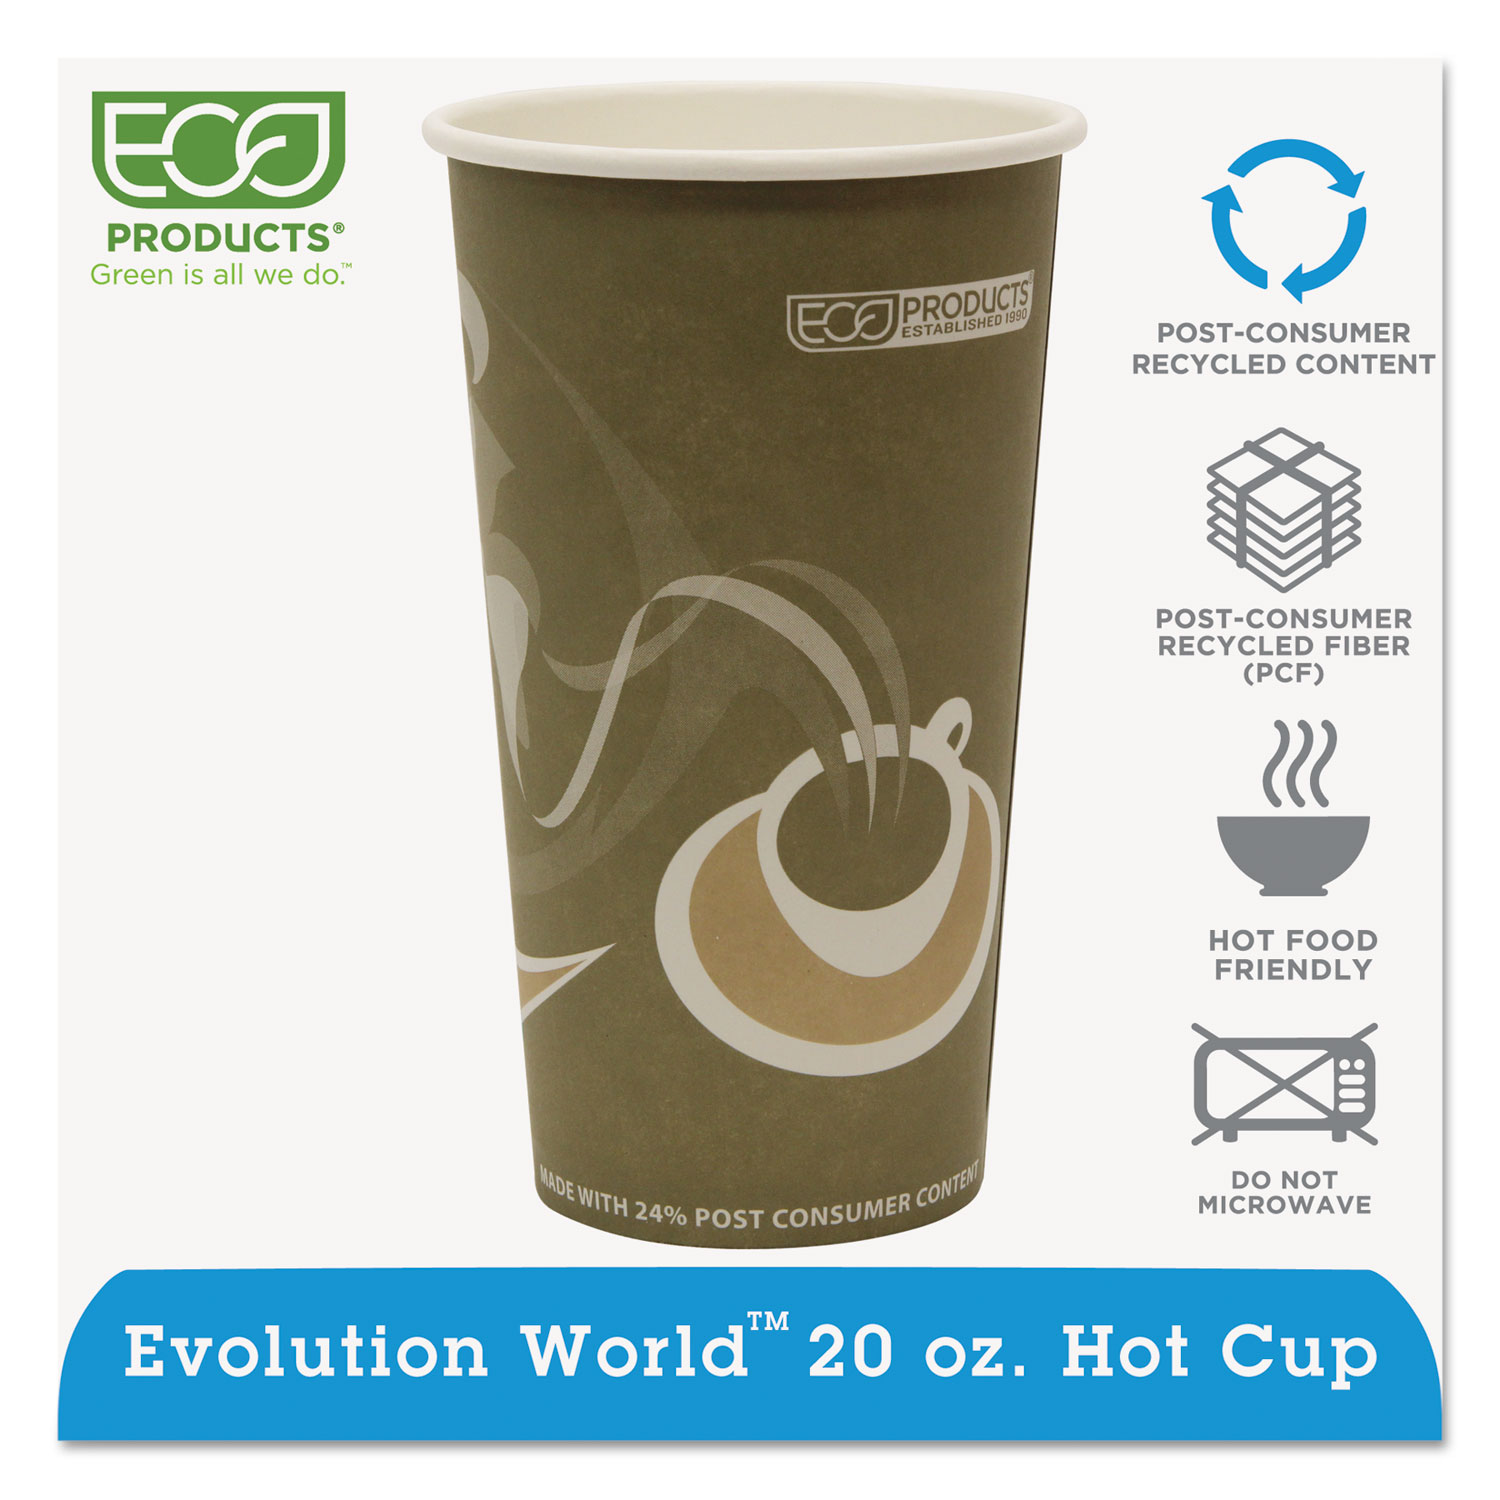  Eco-Products EP-BRHC20-EW Evolution World 24% Recycled Content Hot Cups - 20oz., 50/PK, 20 PK/CT (ECOEPBRHC20EW) 